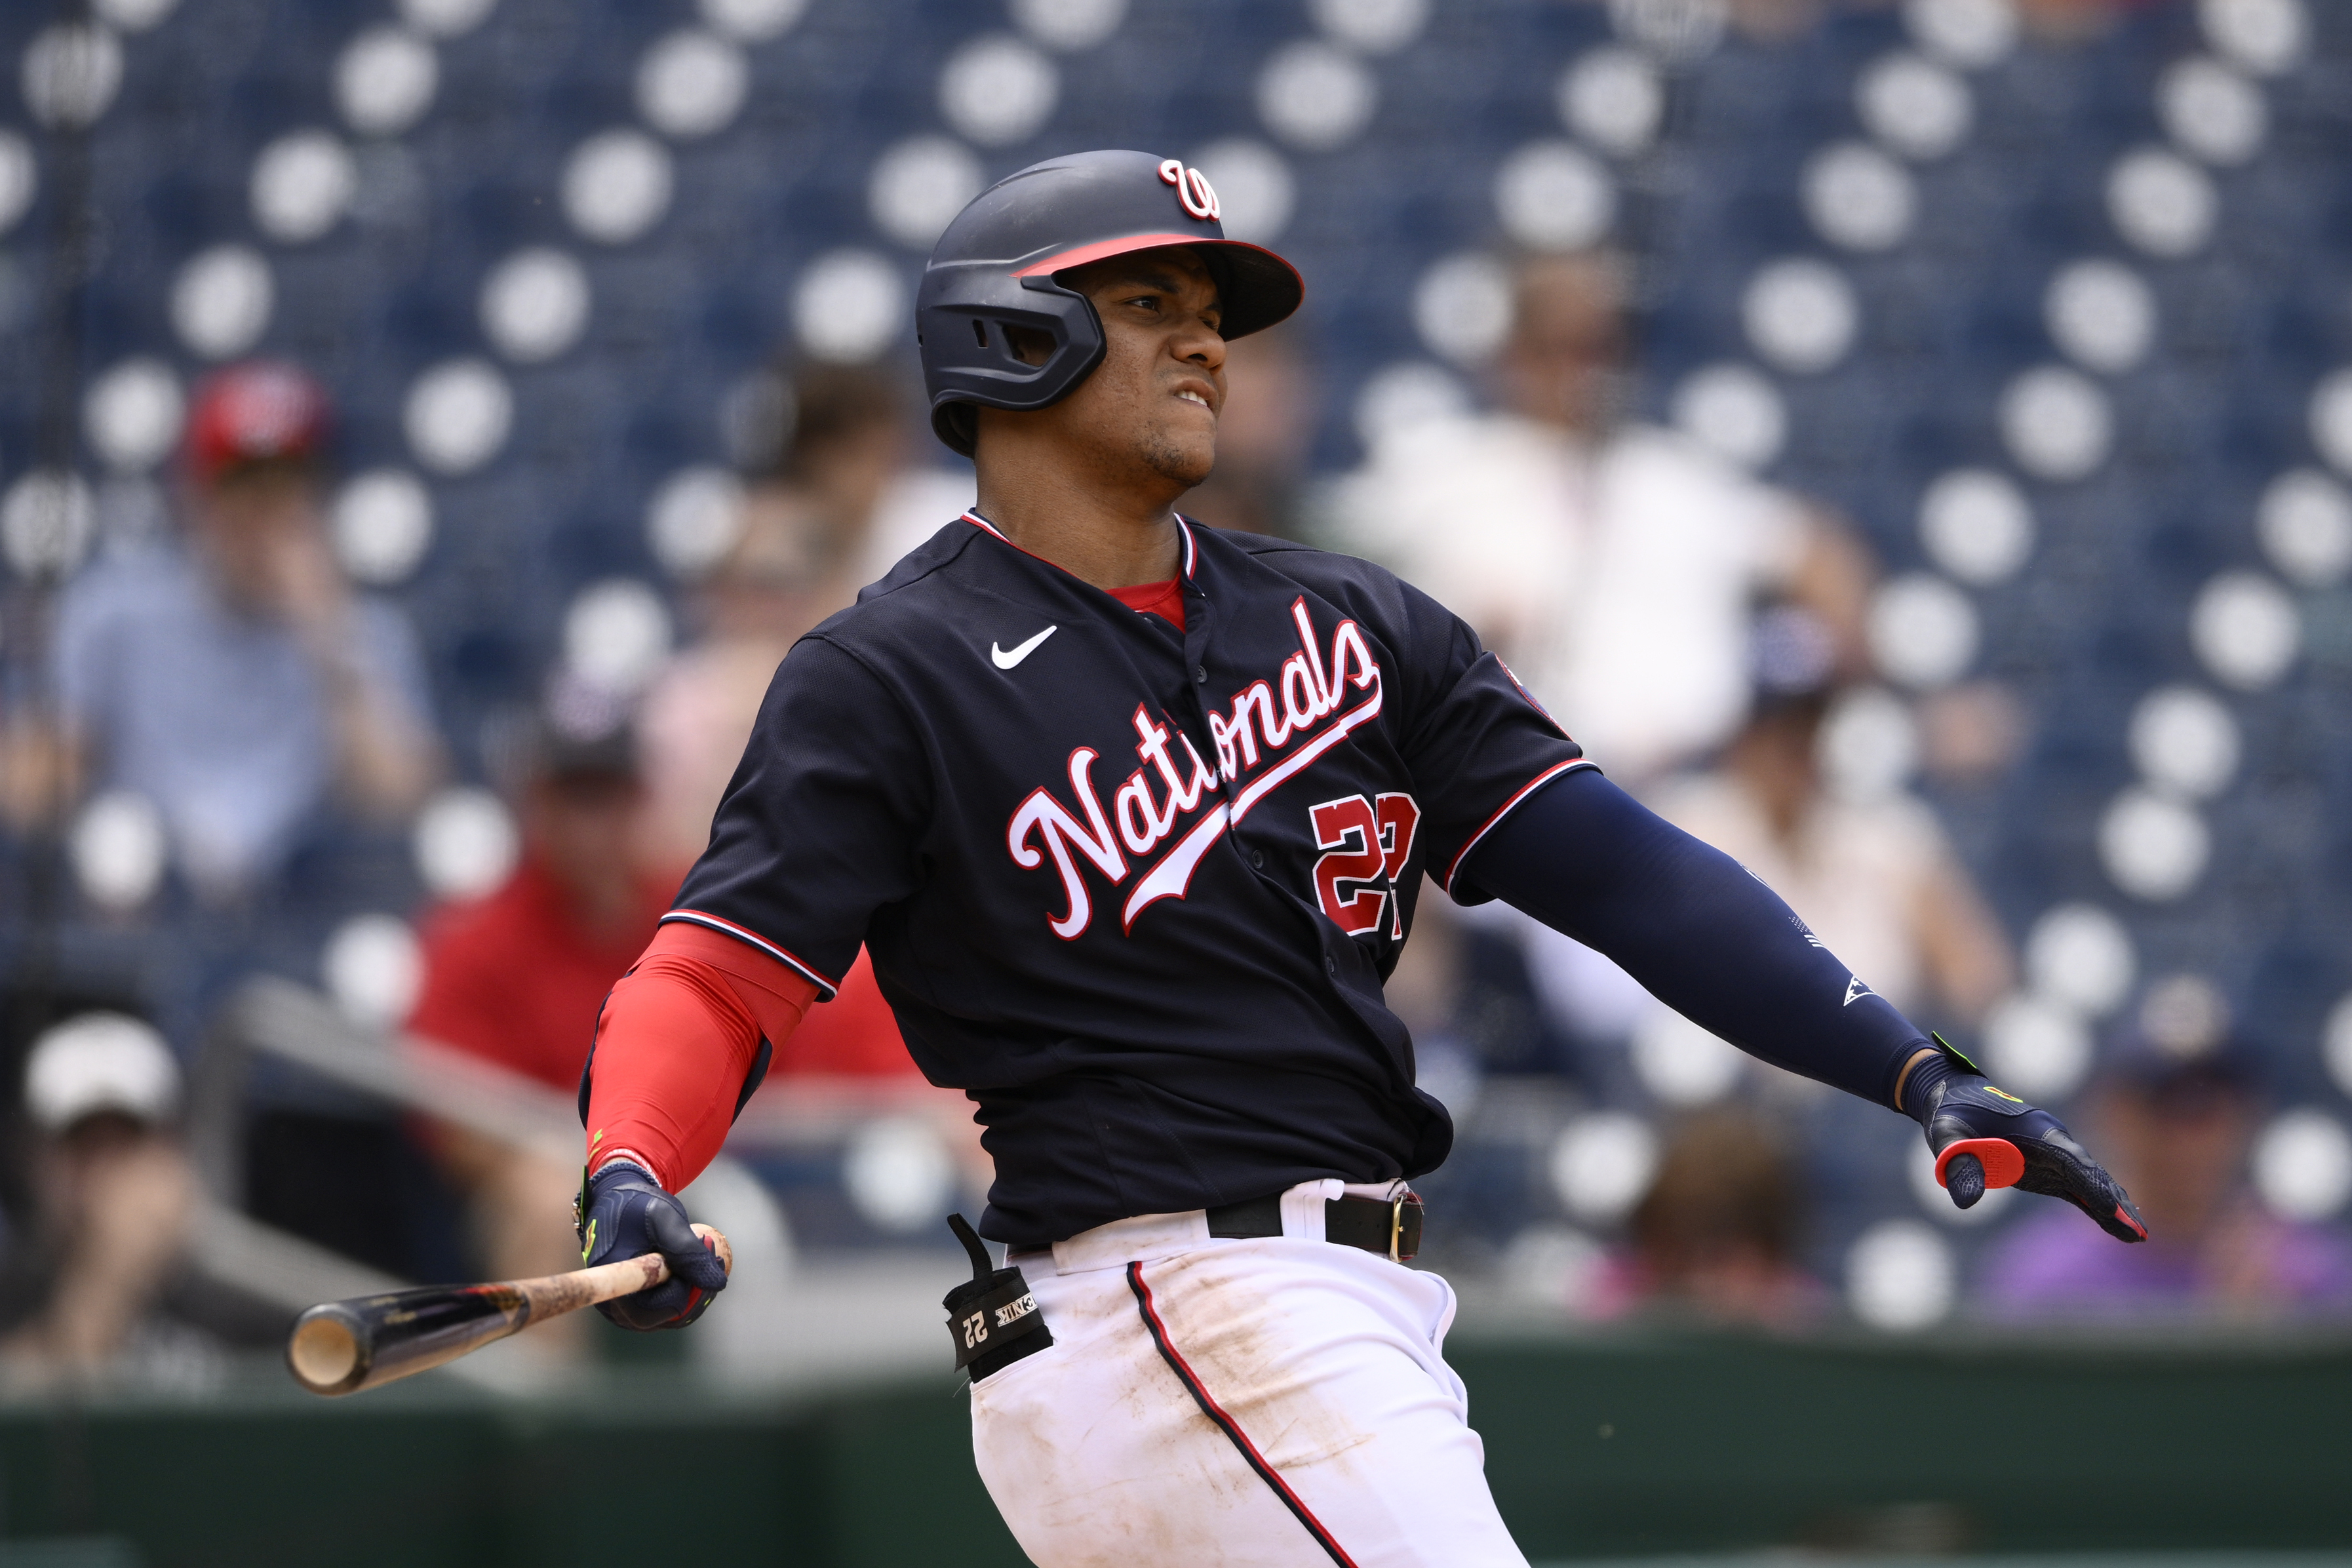 Imagining what trading for Nationals' Juan Soto would mean to